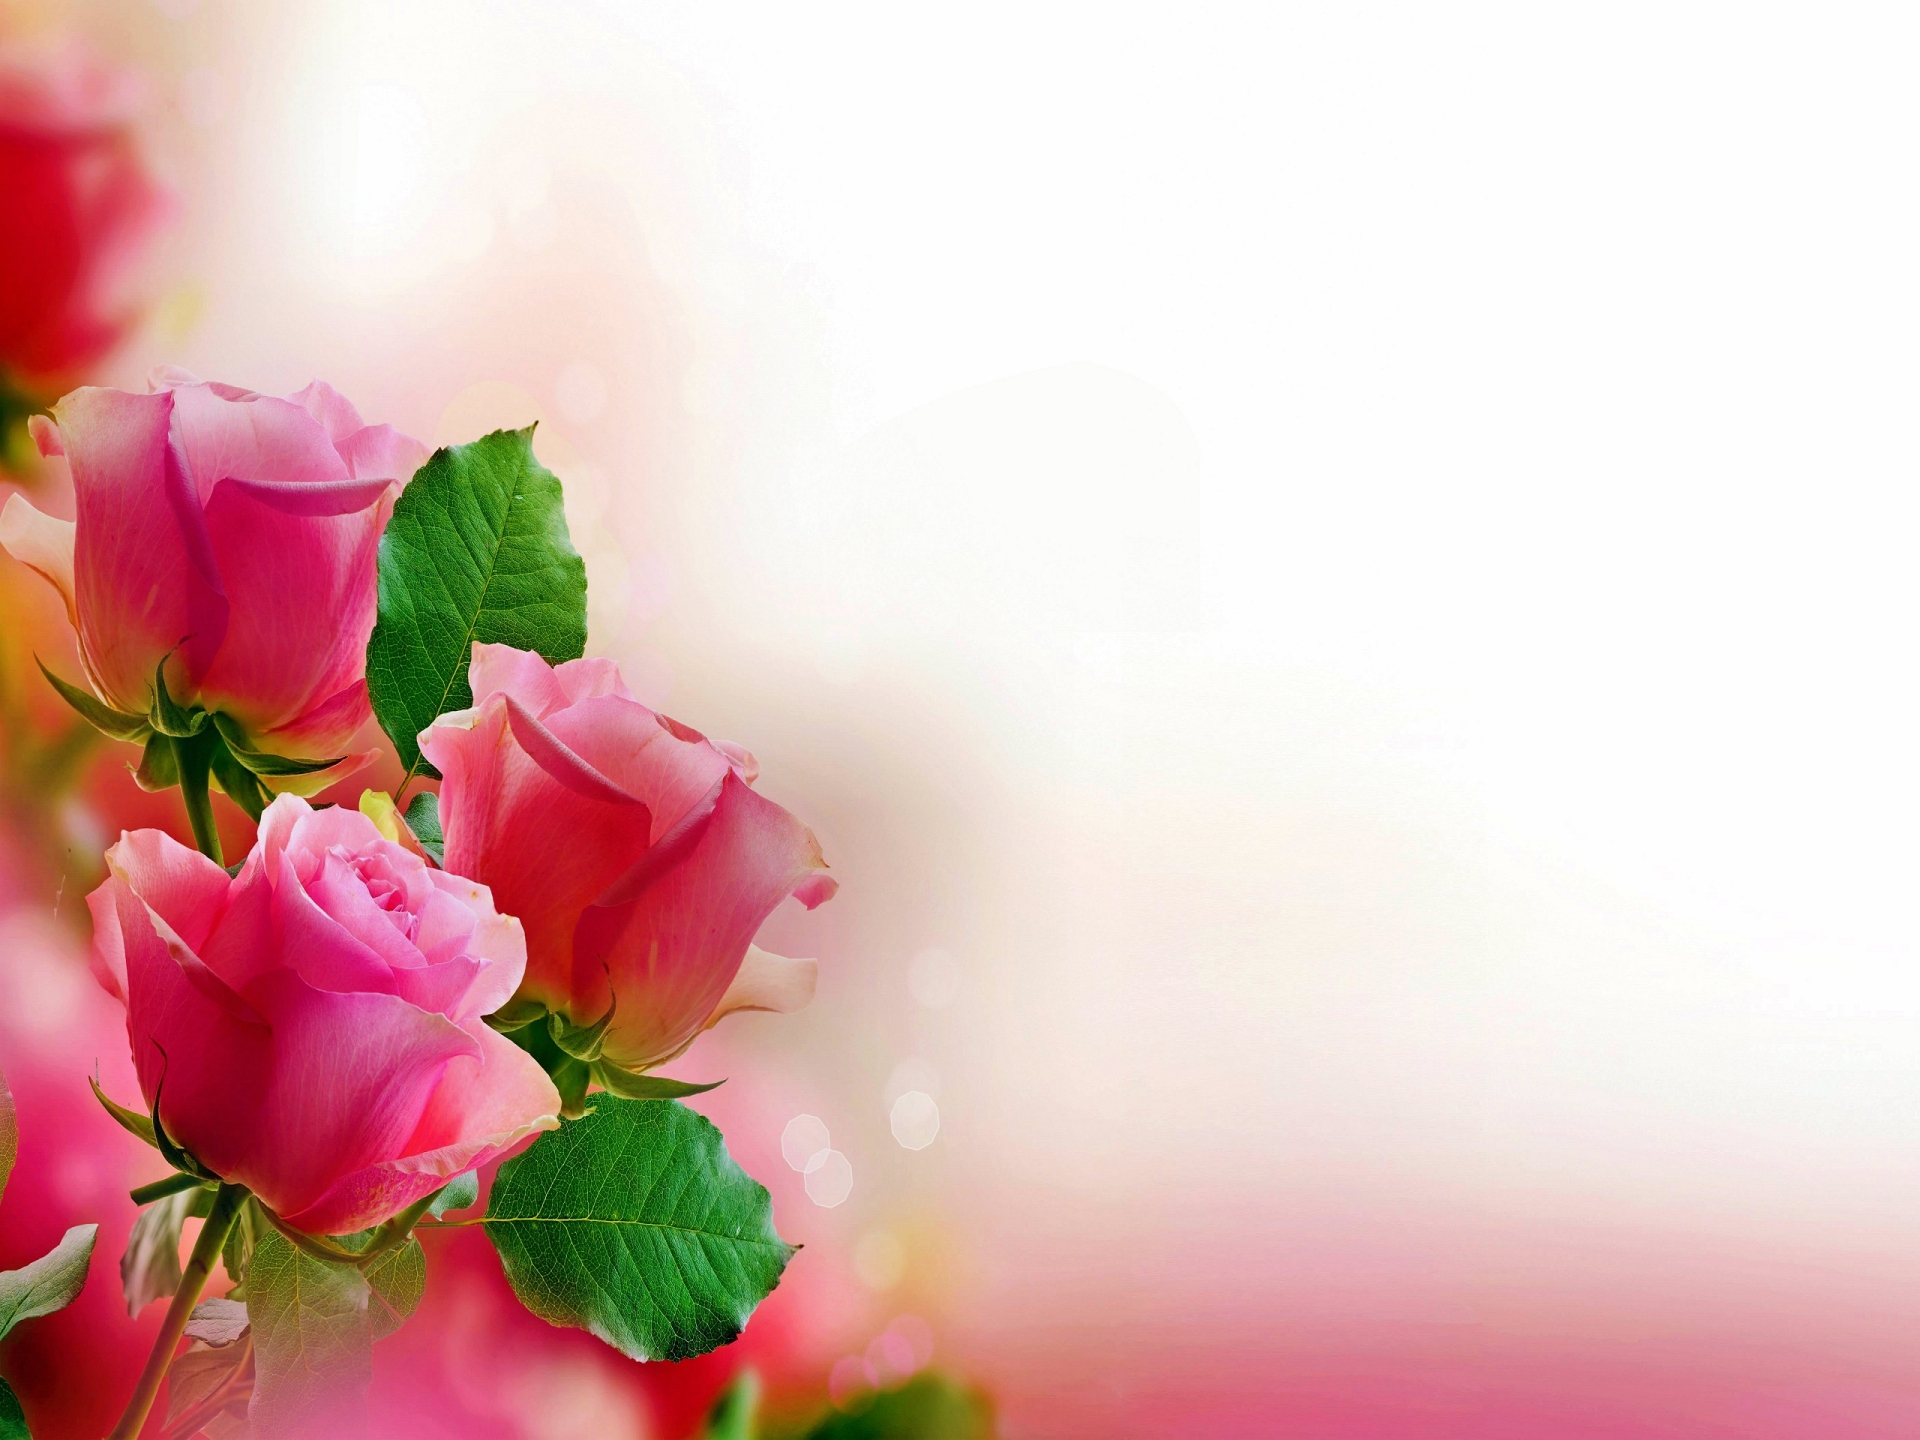 Pink Roses for 1920 x 1440 resolution